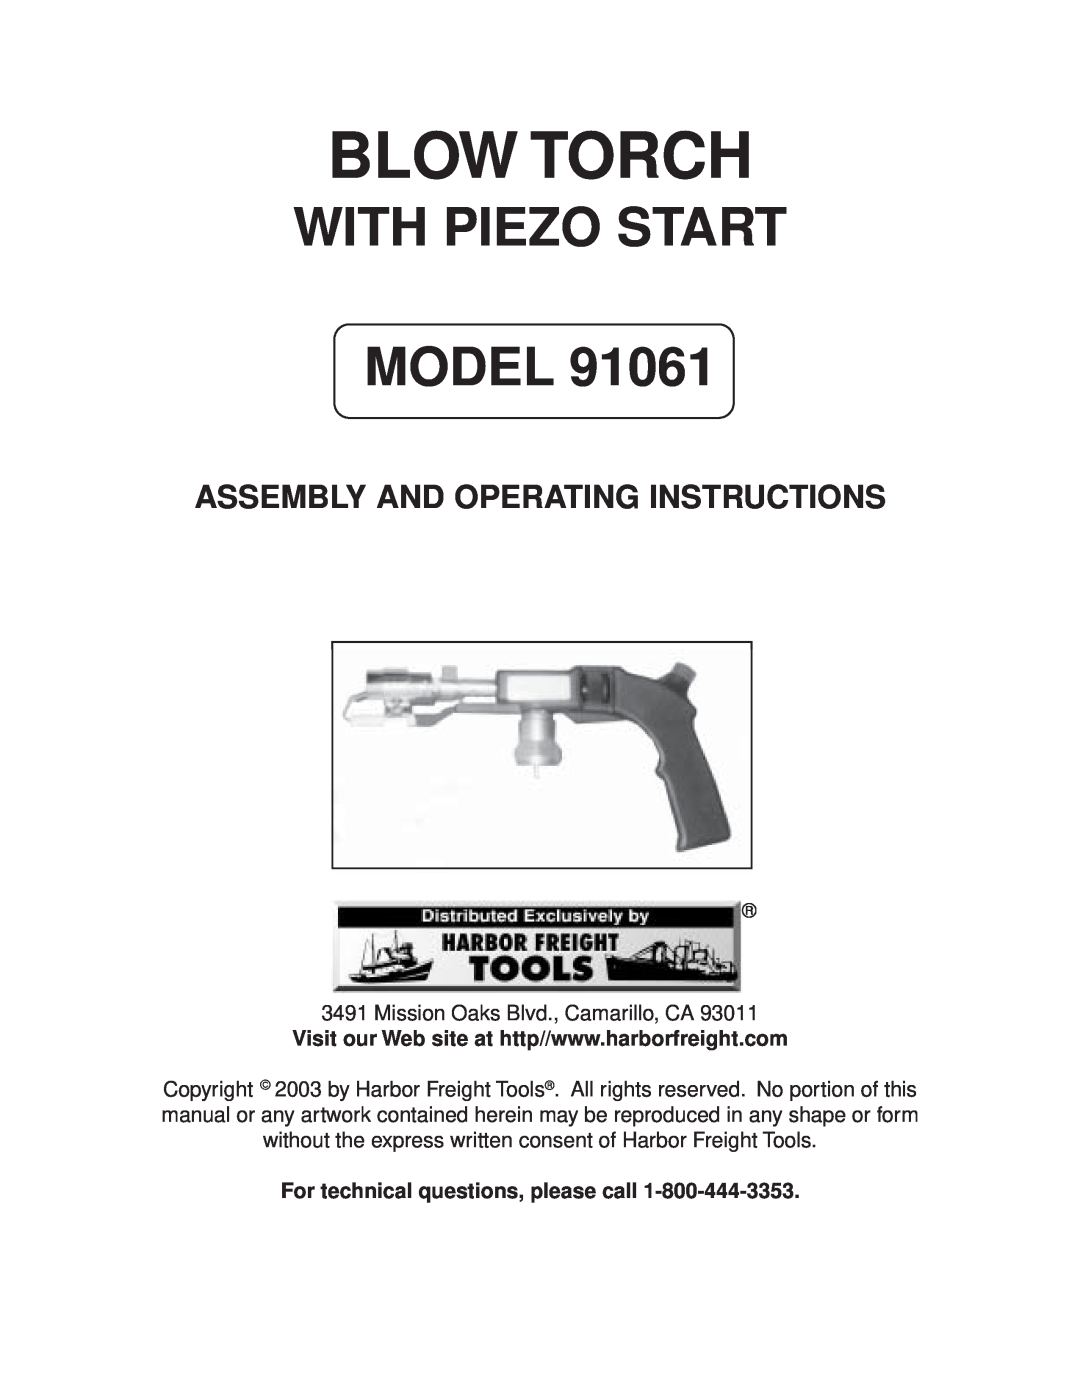 Harbor Freight Tools 91061 operating instructions Blow Torch, With Piezo Start Model, Assembly And Operating Instructions 